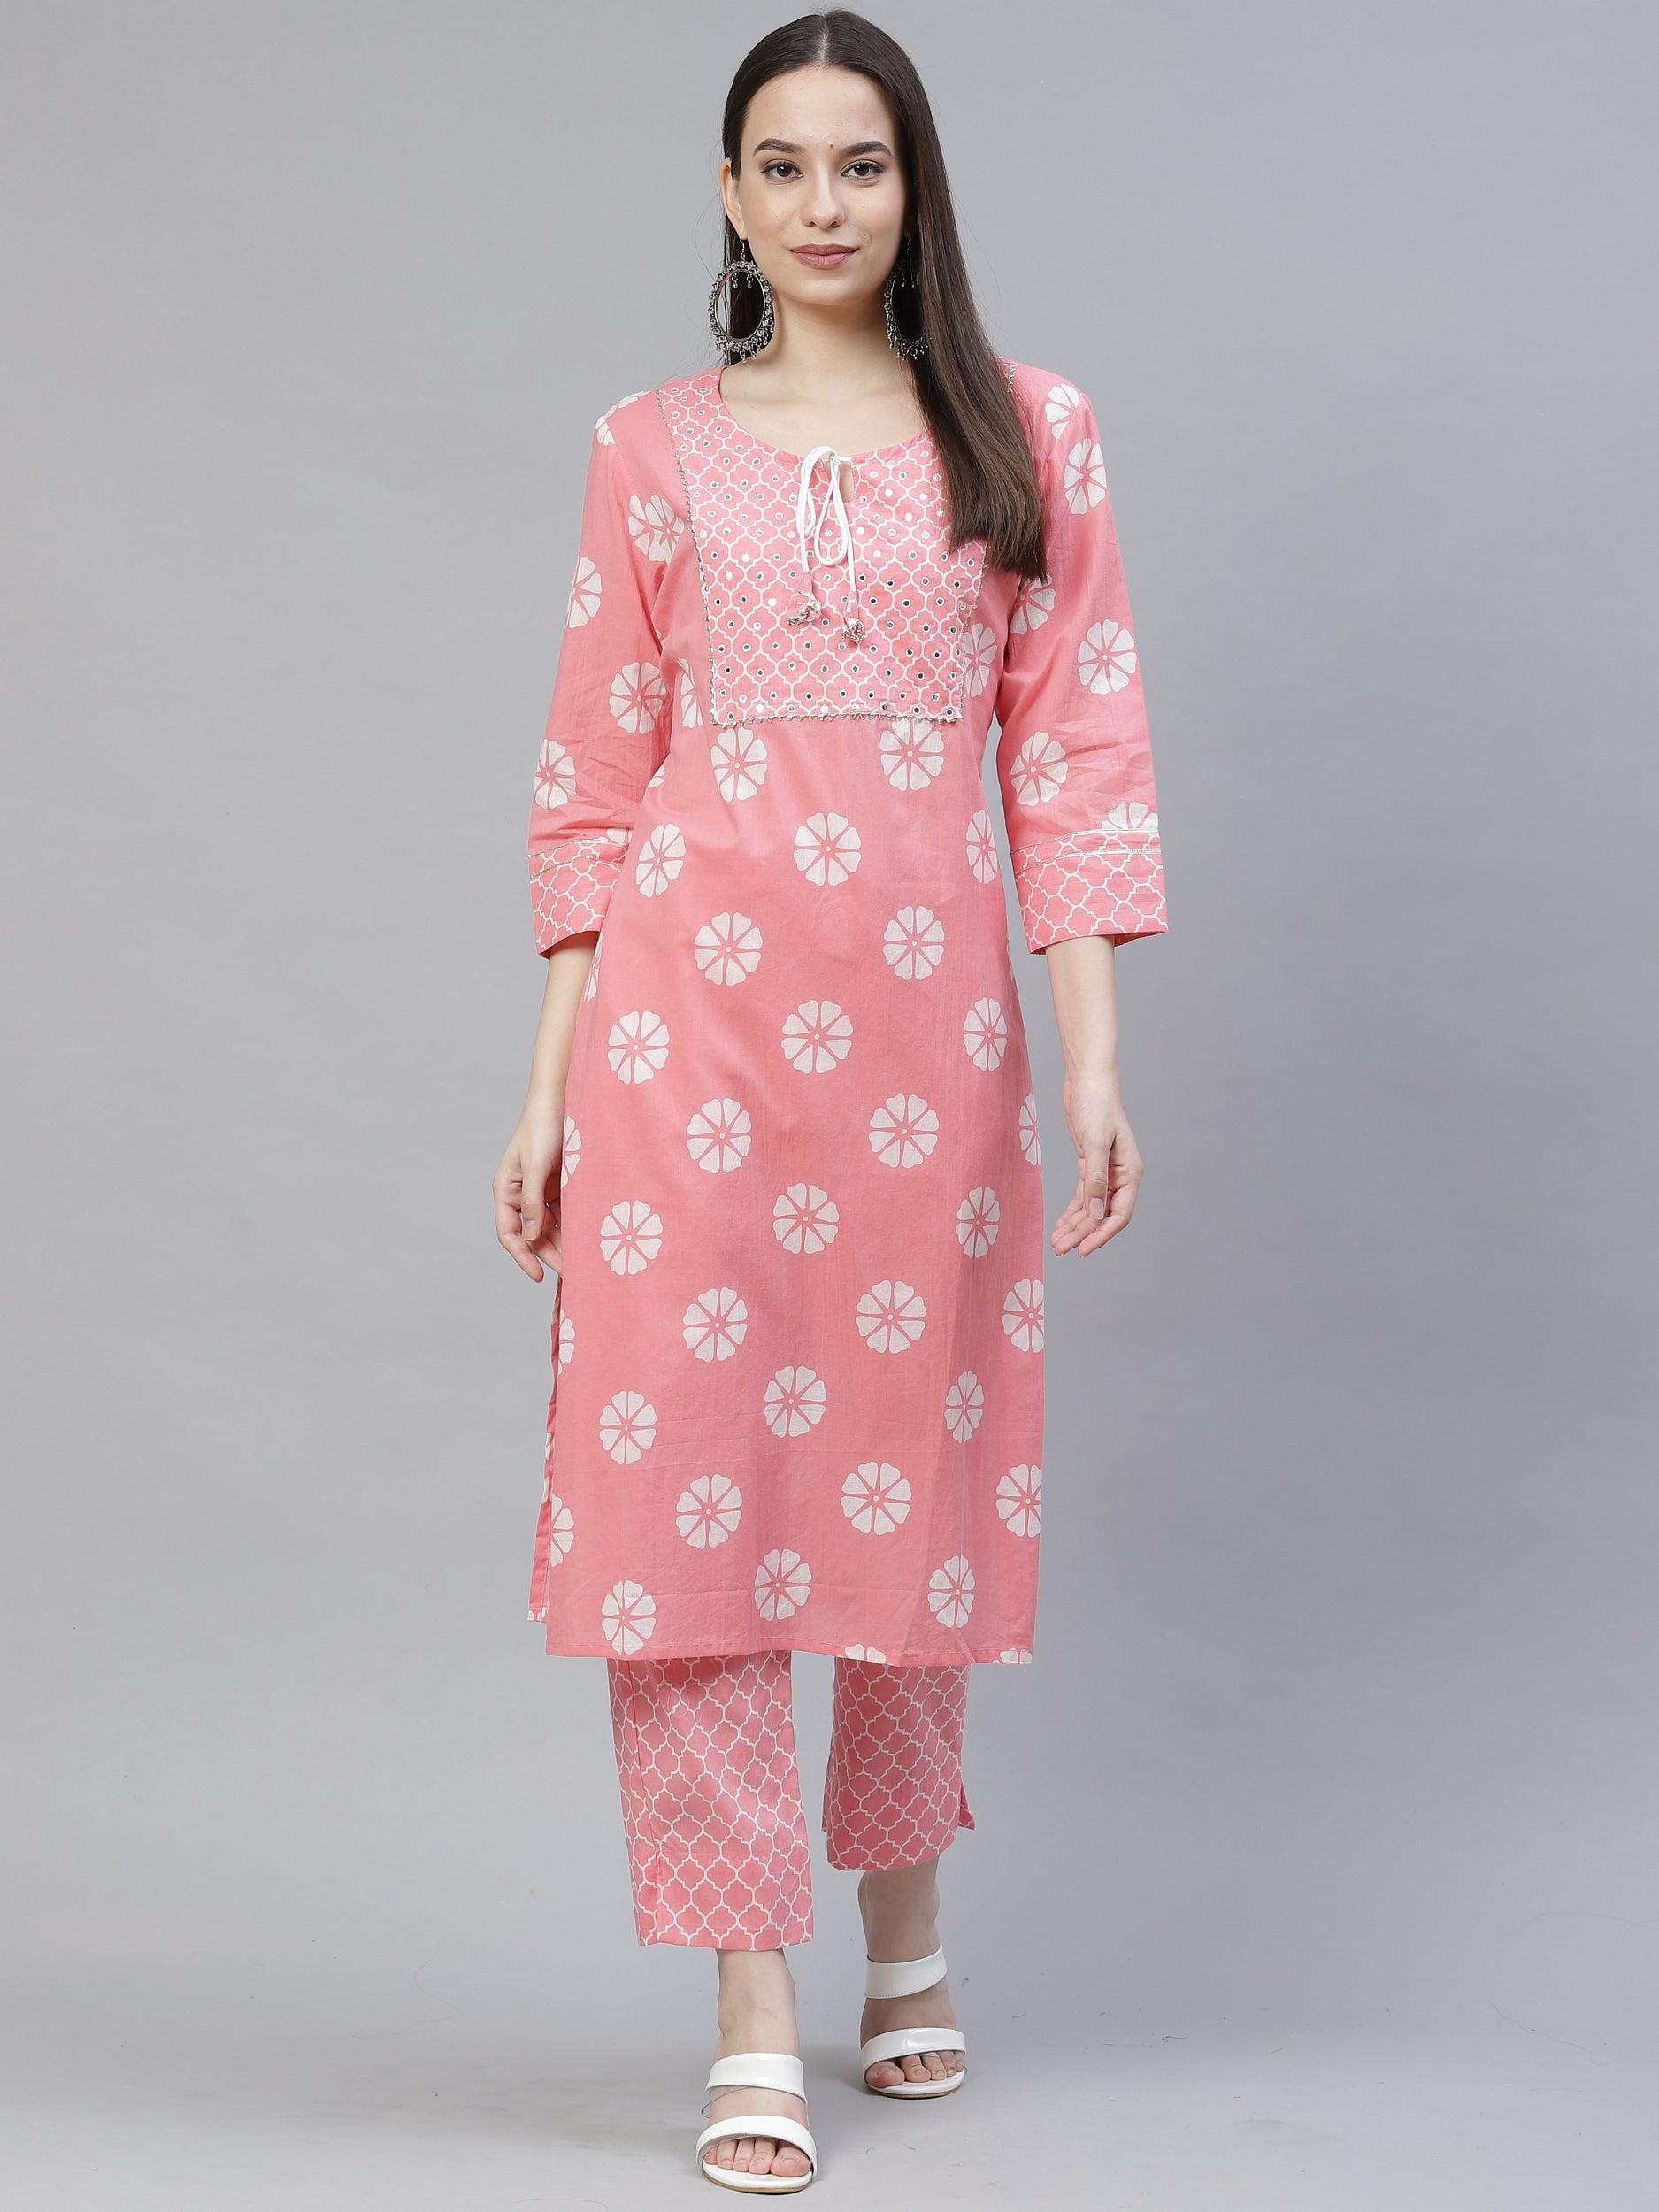 Women's pink and white printed floral kurta with trousers - Meeranshi